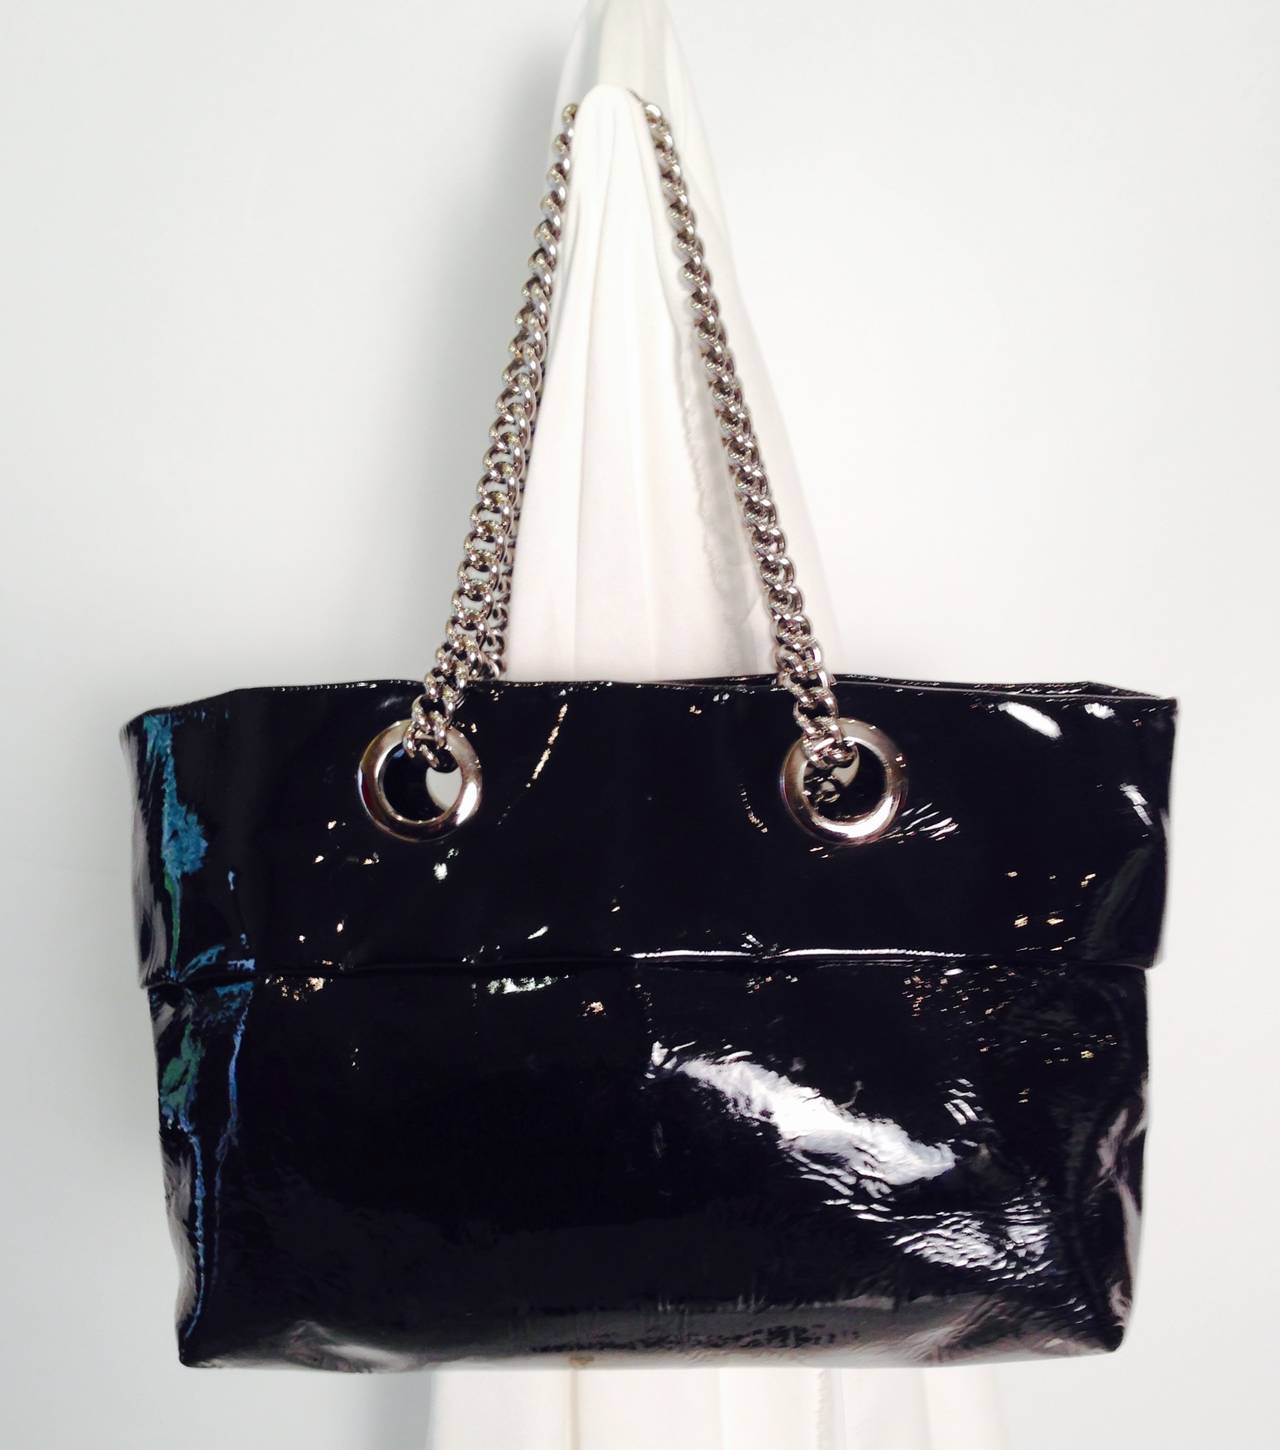 Christian Louboutin Patent Leather Tote With Silver Chain Straps For Sale at 1stdibs